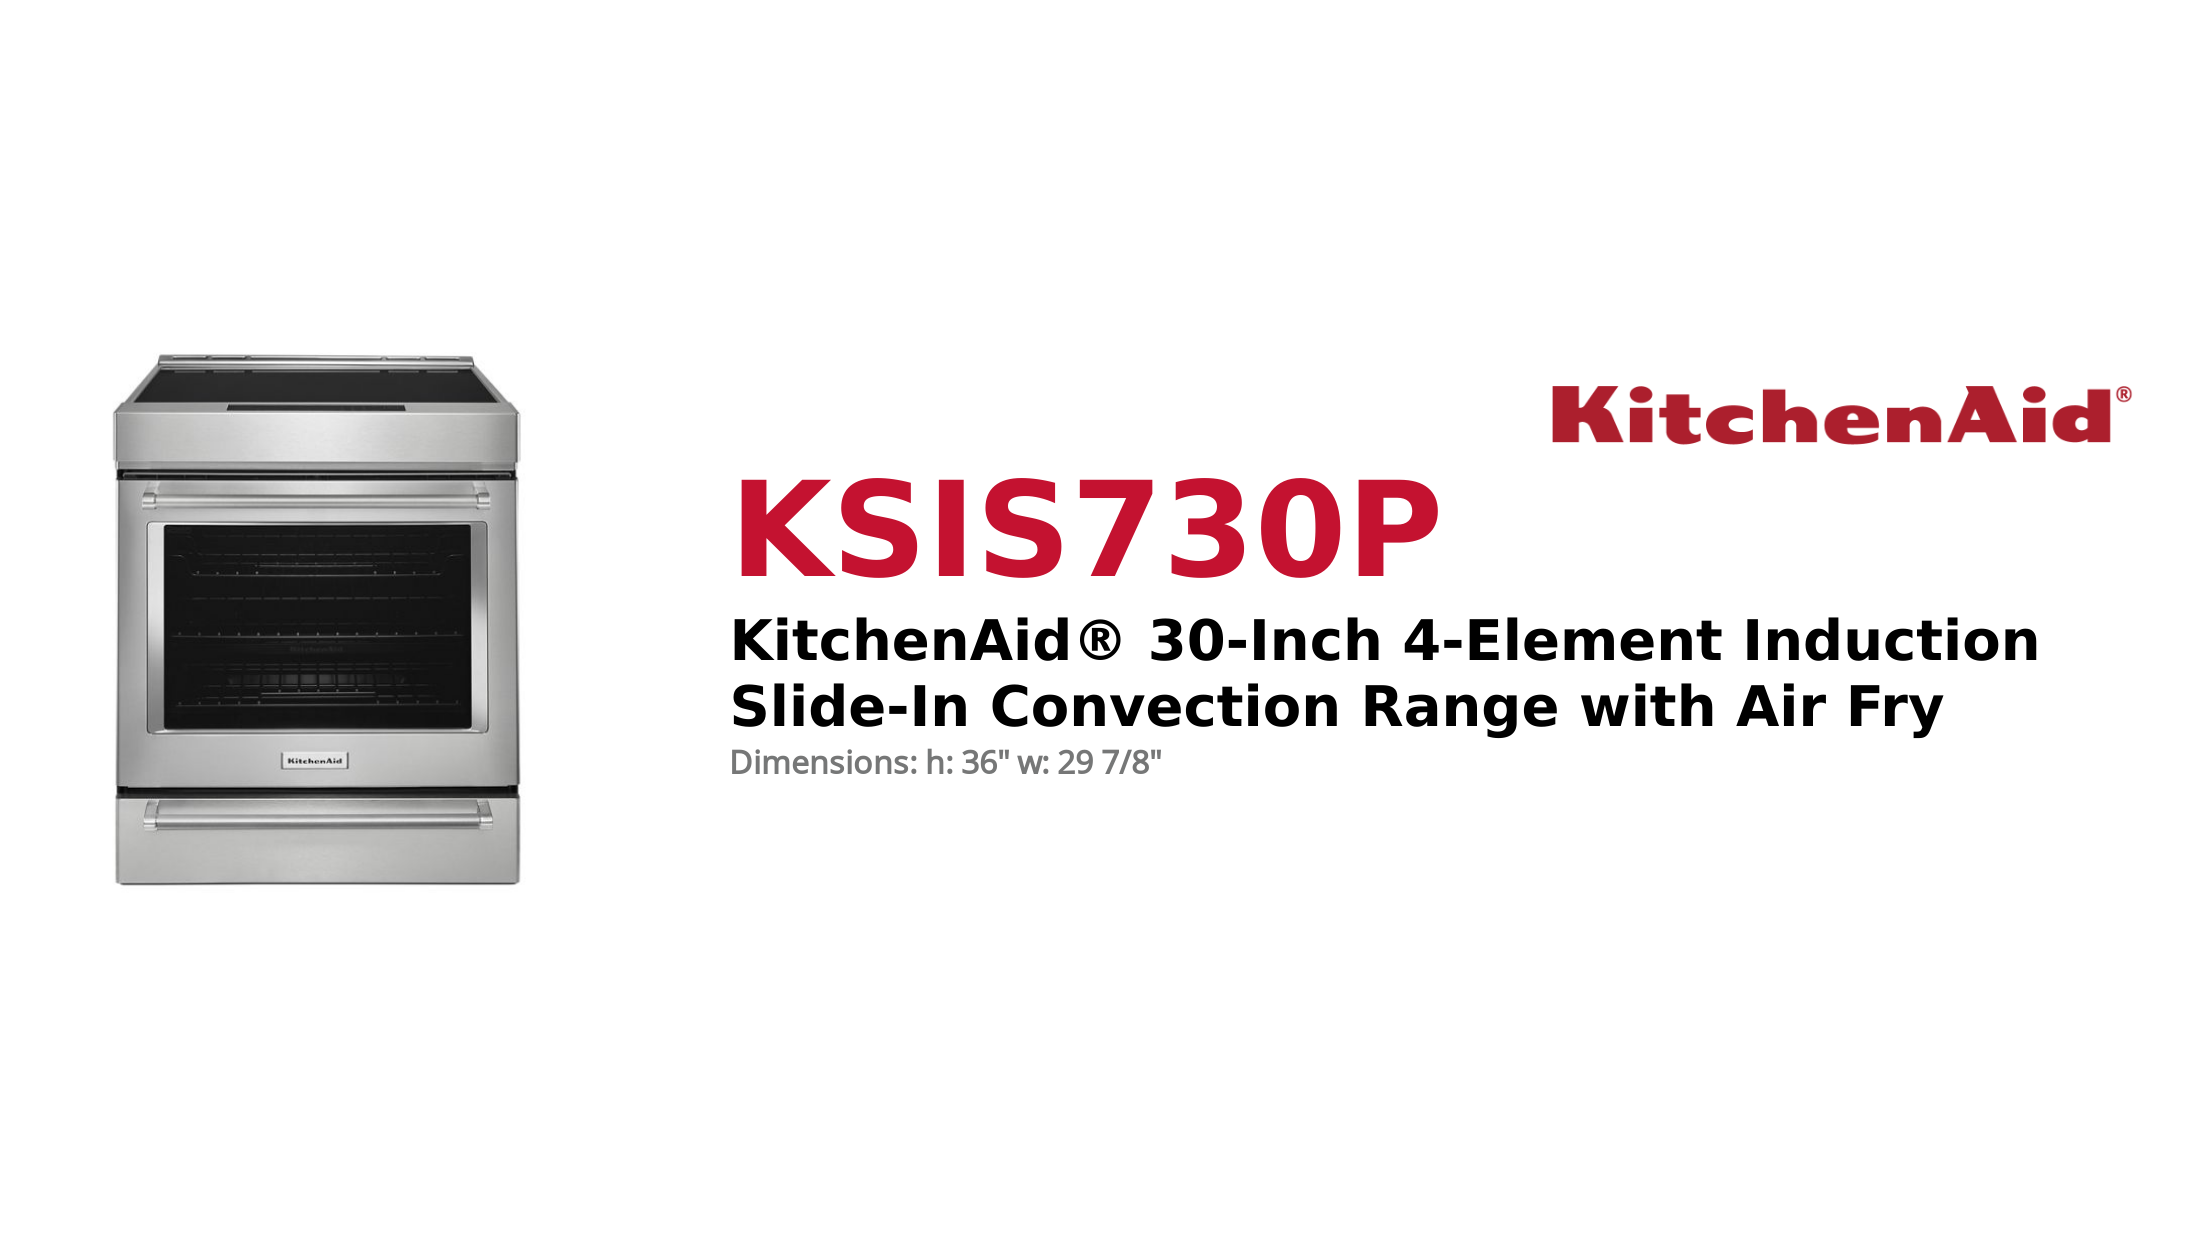 



KITCHENAID® 30-INCH 4-ELEMENT INDUCTION SLIDE-IN CONVECTION RANGE WITH AIR FRY



